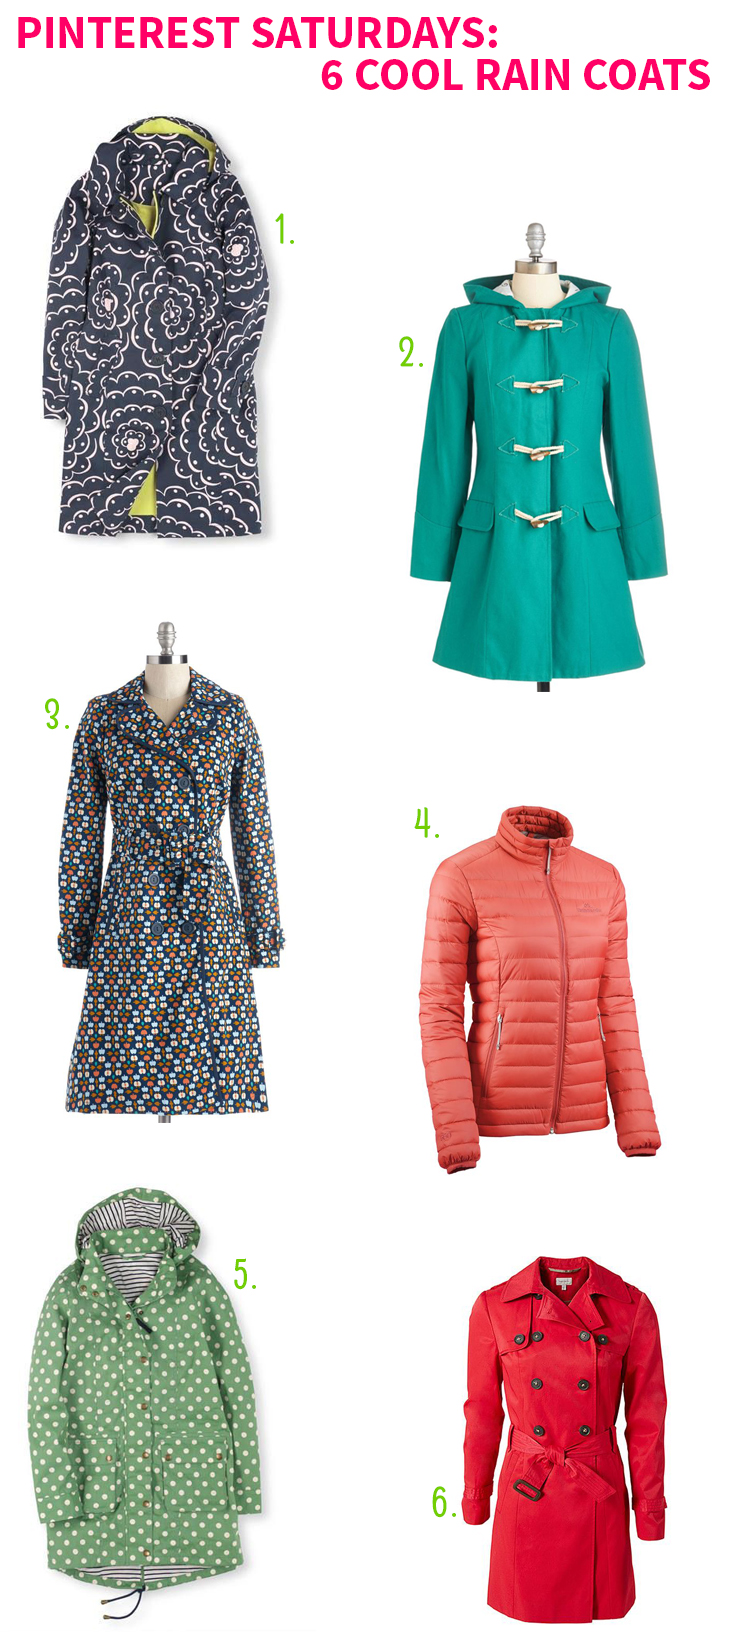 Pinterest Saturdays: 6 Cool Rain Coats on Style for a Happy Home // Click for details